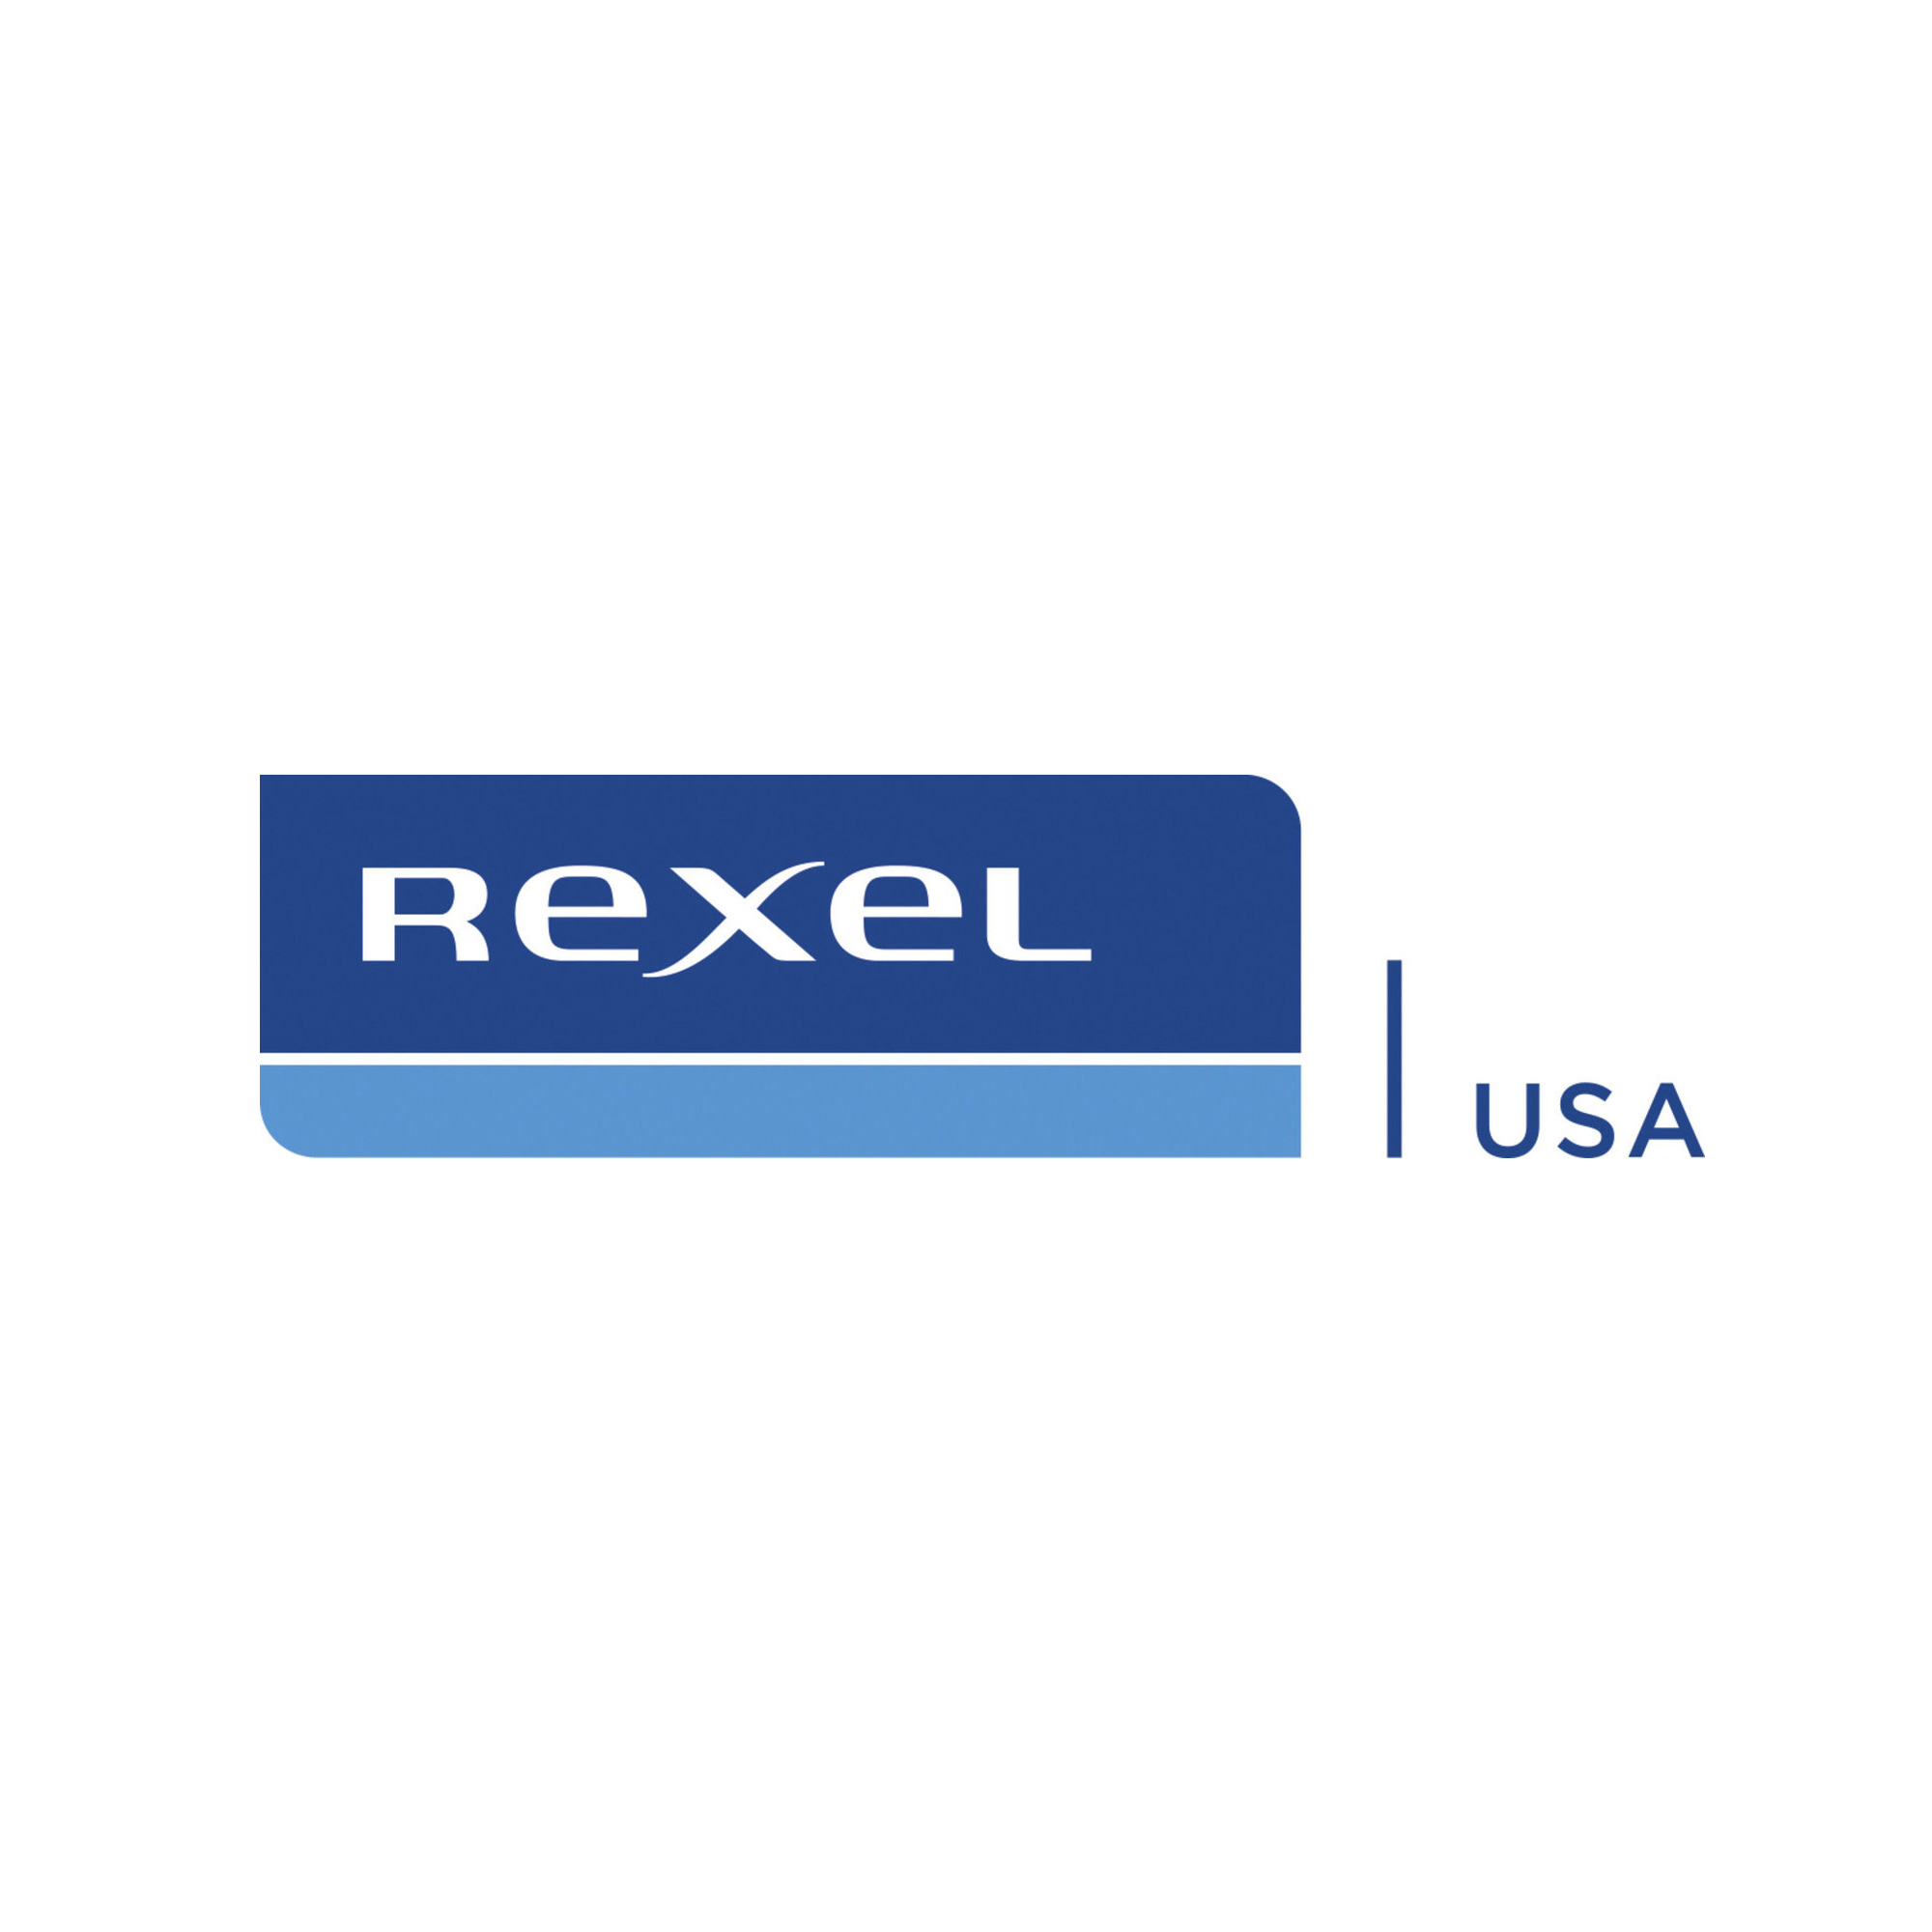 Rexel USA inc logo and vendors to Think Construction Services